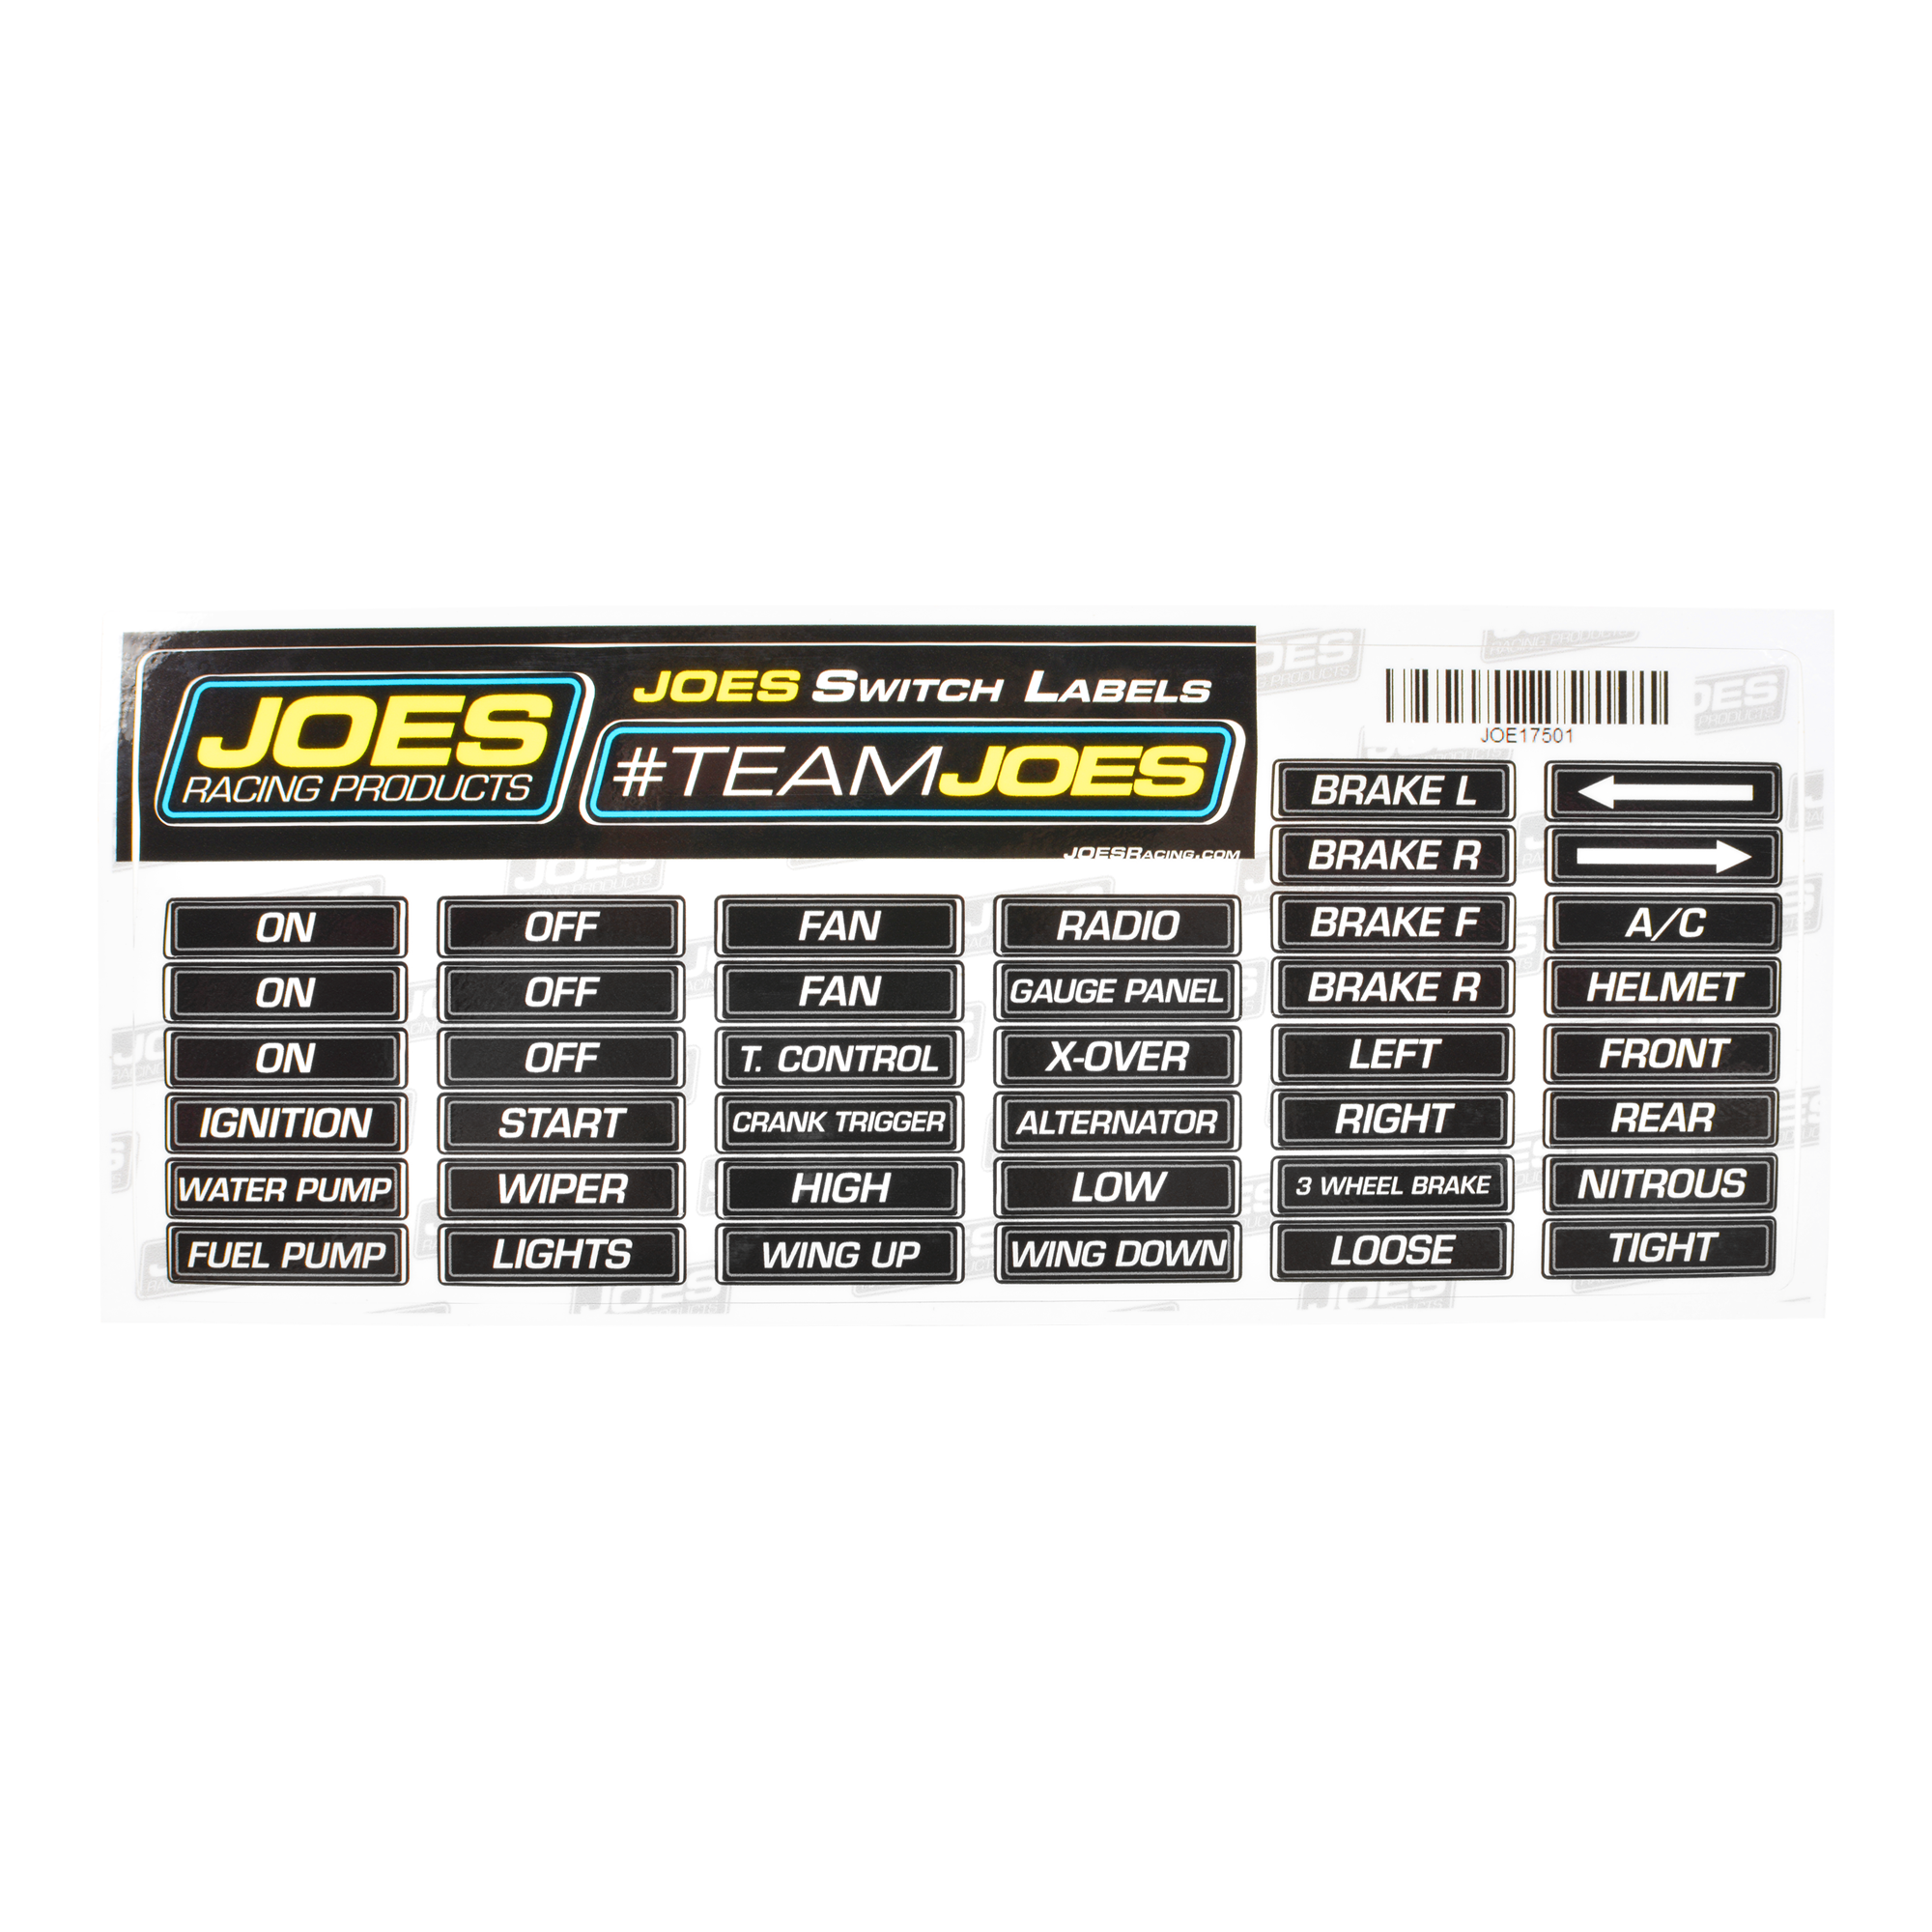 Ignition Start 2 Accessory With Light JOES Racing Products 46125 Switch Panel 